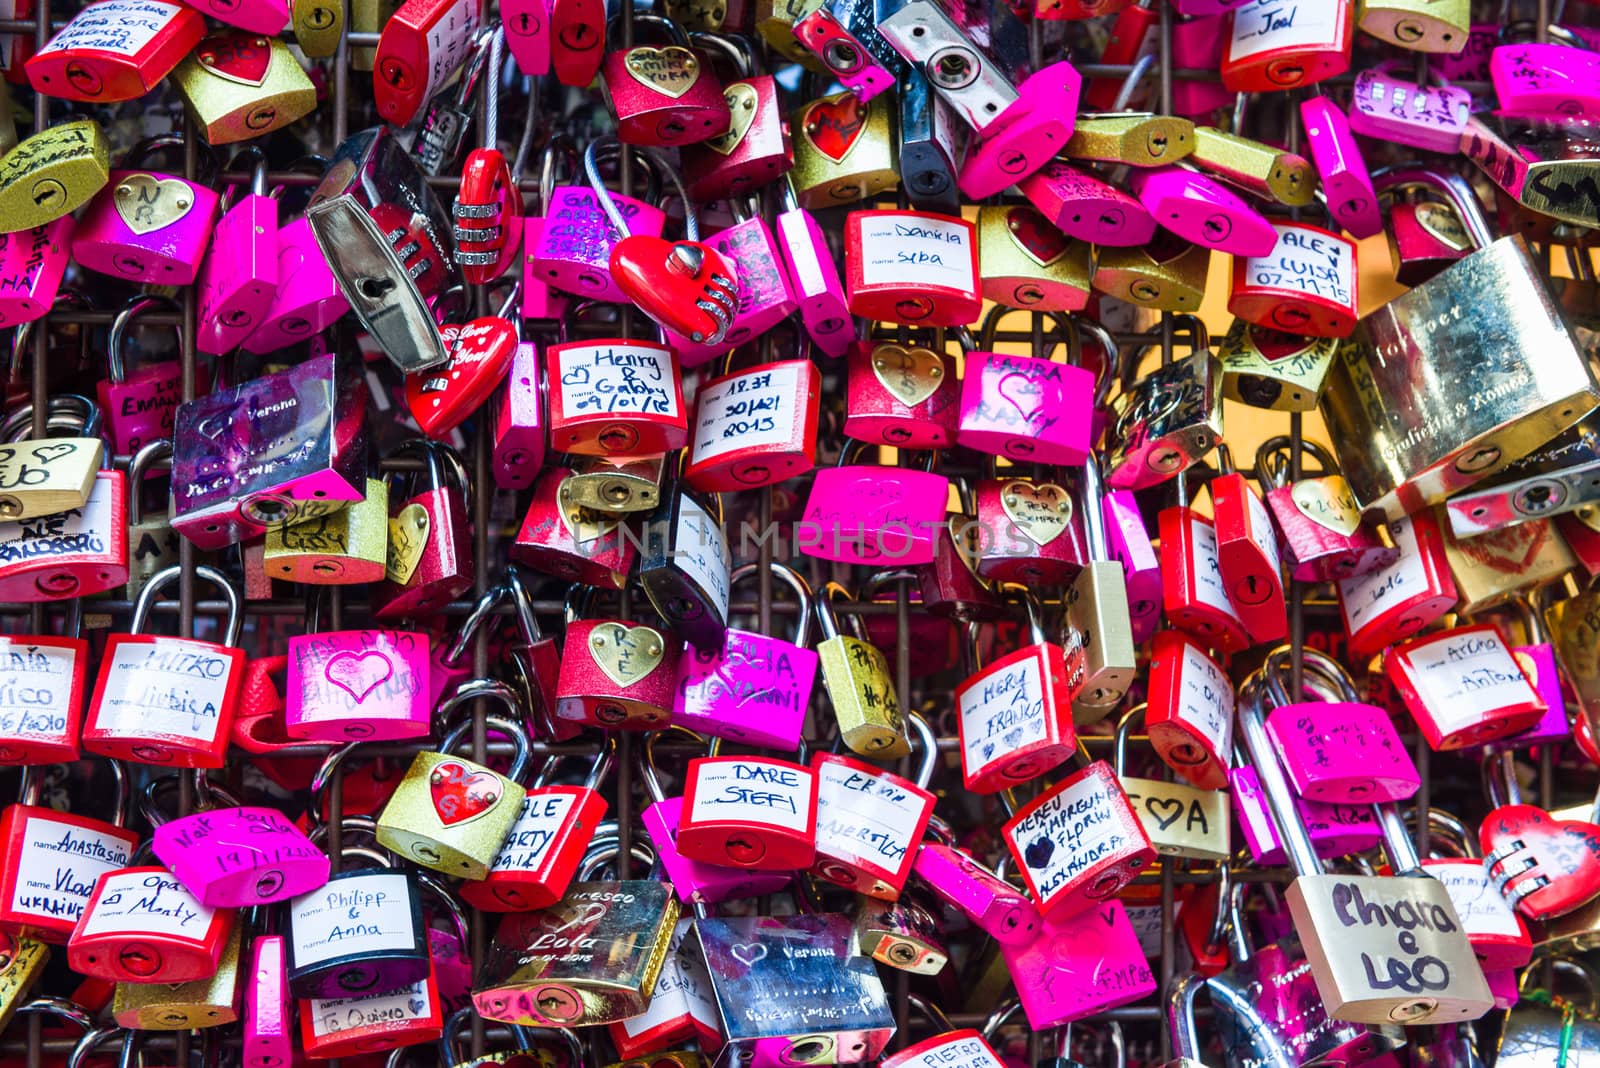 Love Padlocks in face of Juliet House in Verona, Italy, site of Romeo and Juliet Drama